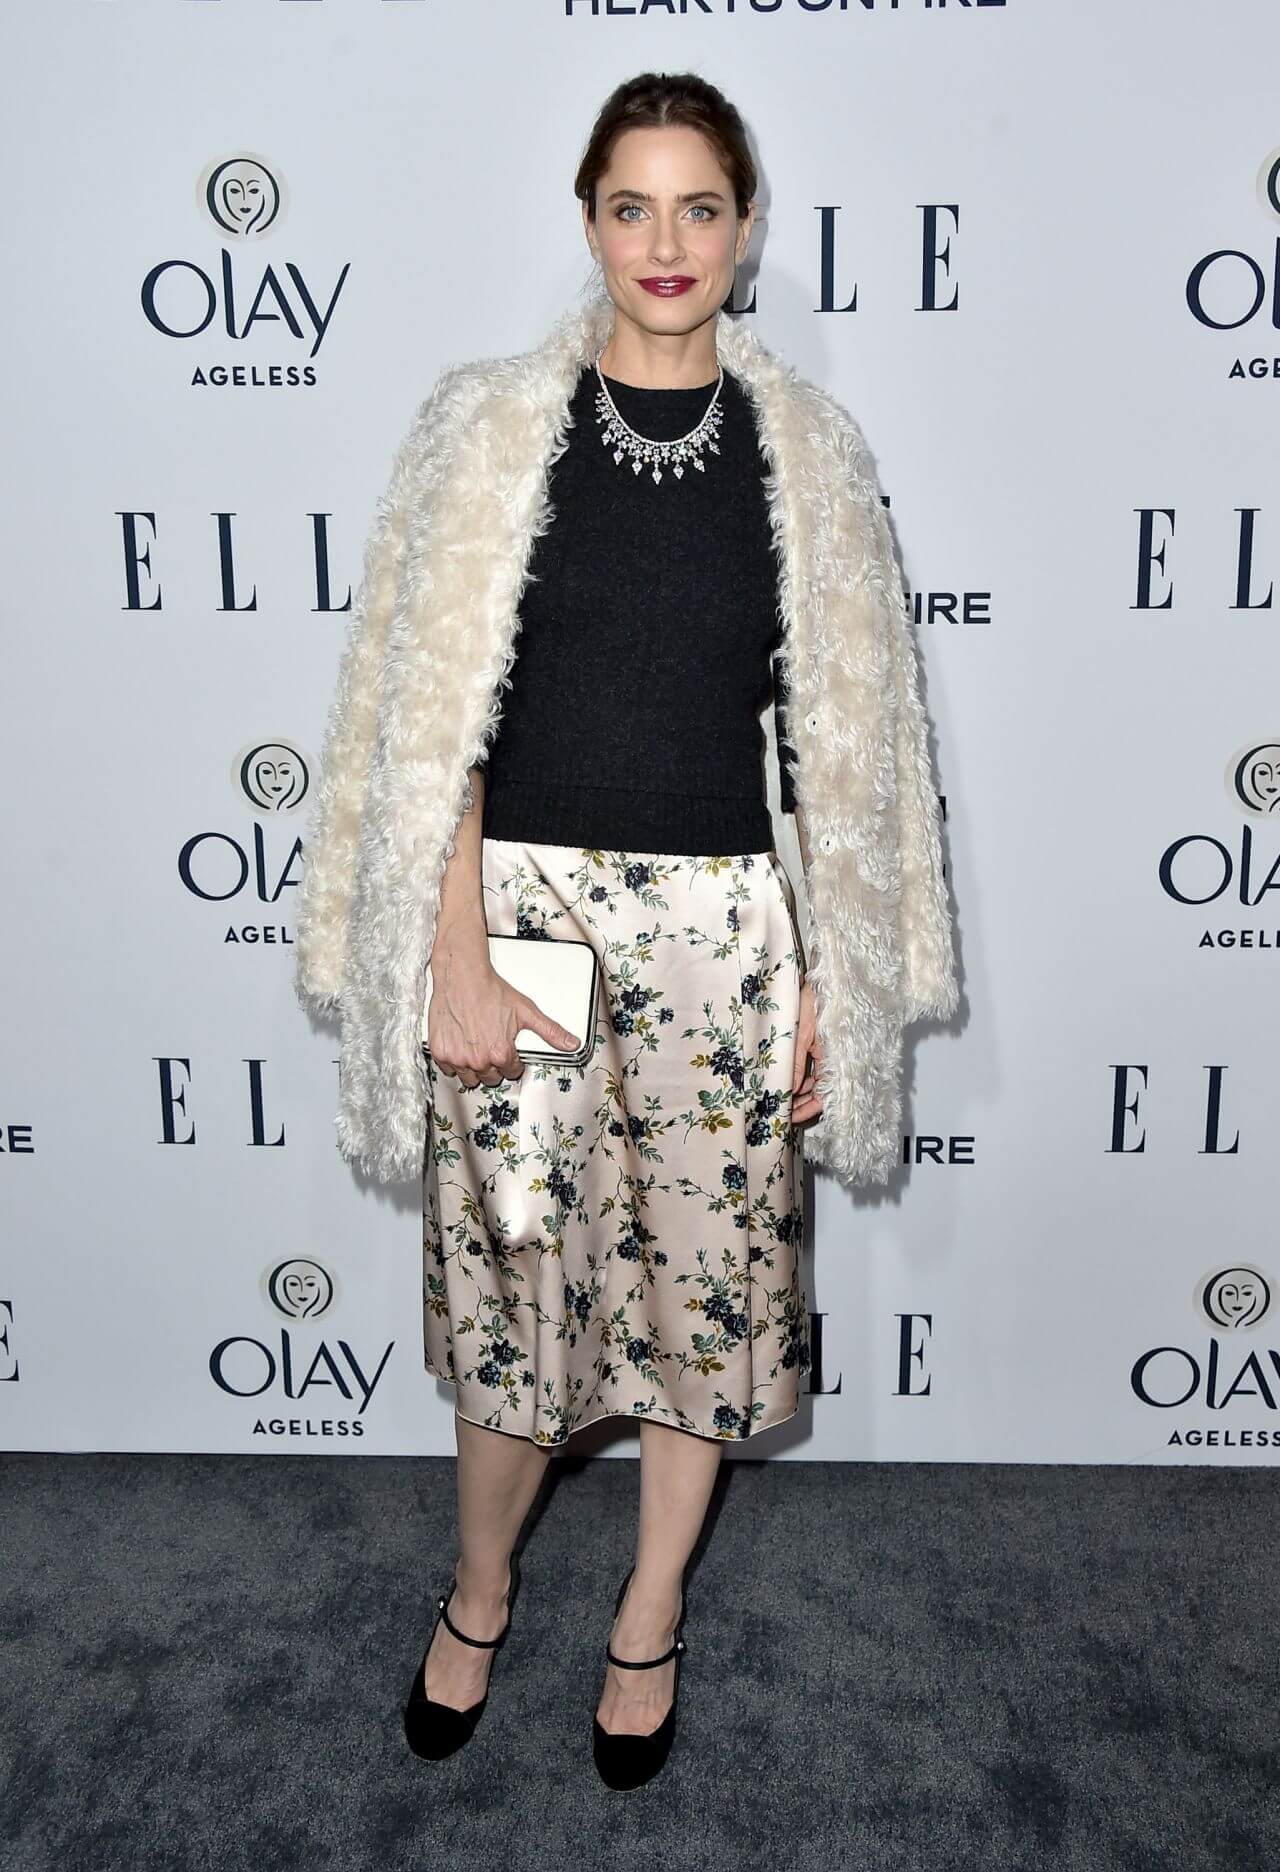 Amanda Peet In White Fur Coat Under Black Top & Printed Skirt With Diamond Necklace At  ELLE’s Women in Television Celebration in Los Angeles